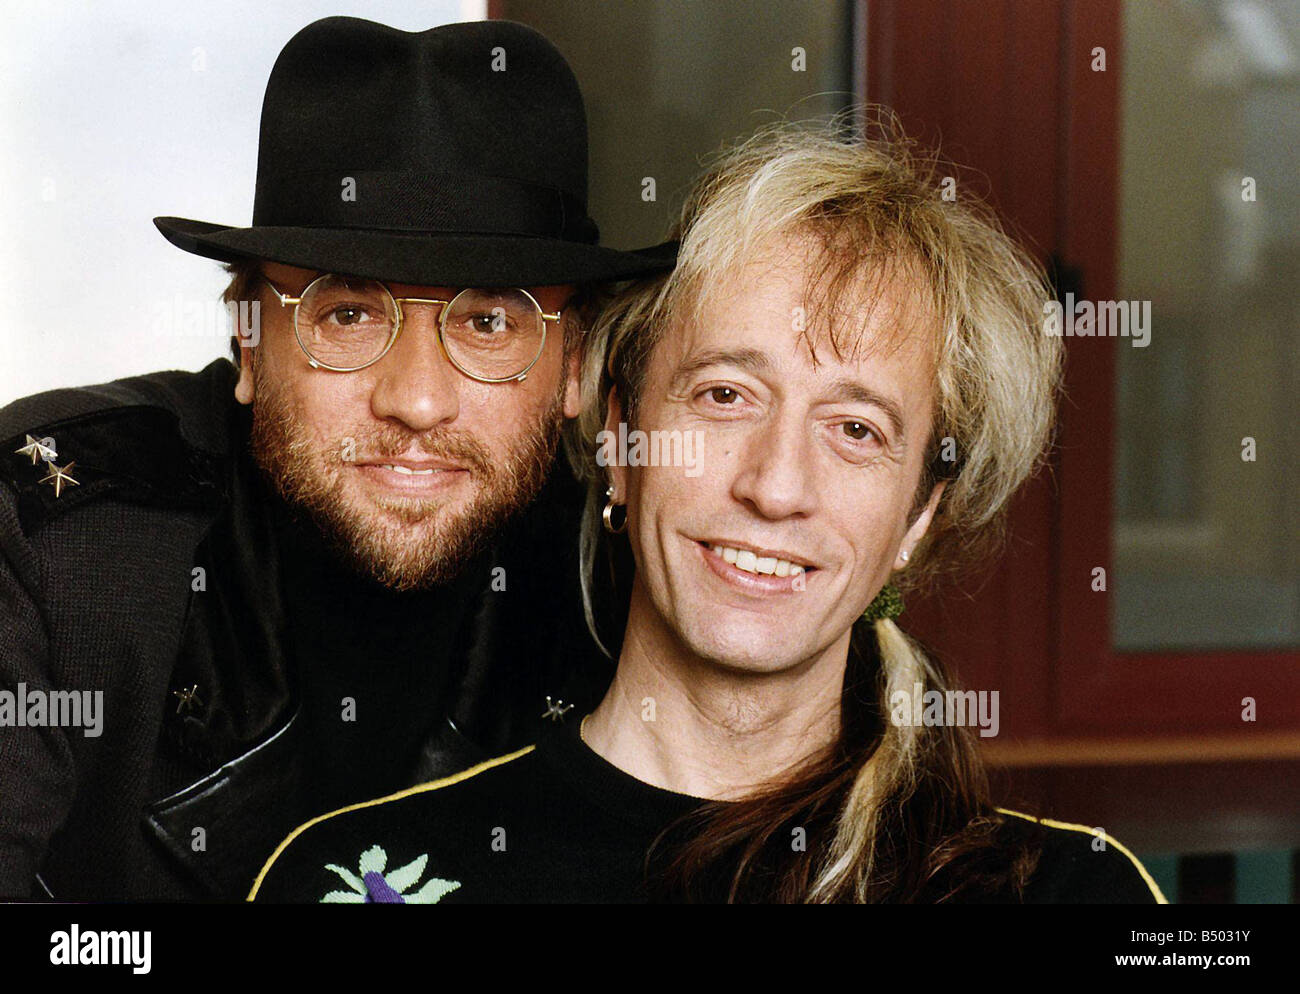 Bee Gees Groupe Pop Maurice Gibb Robin Gibb singer Banque D'Images